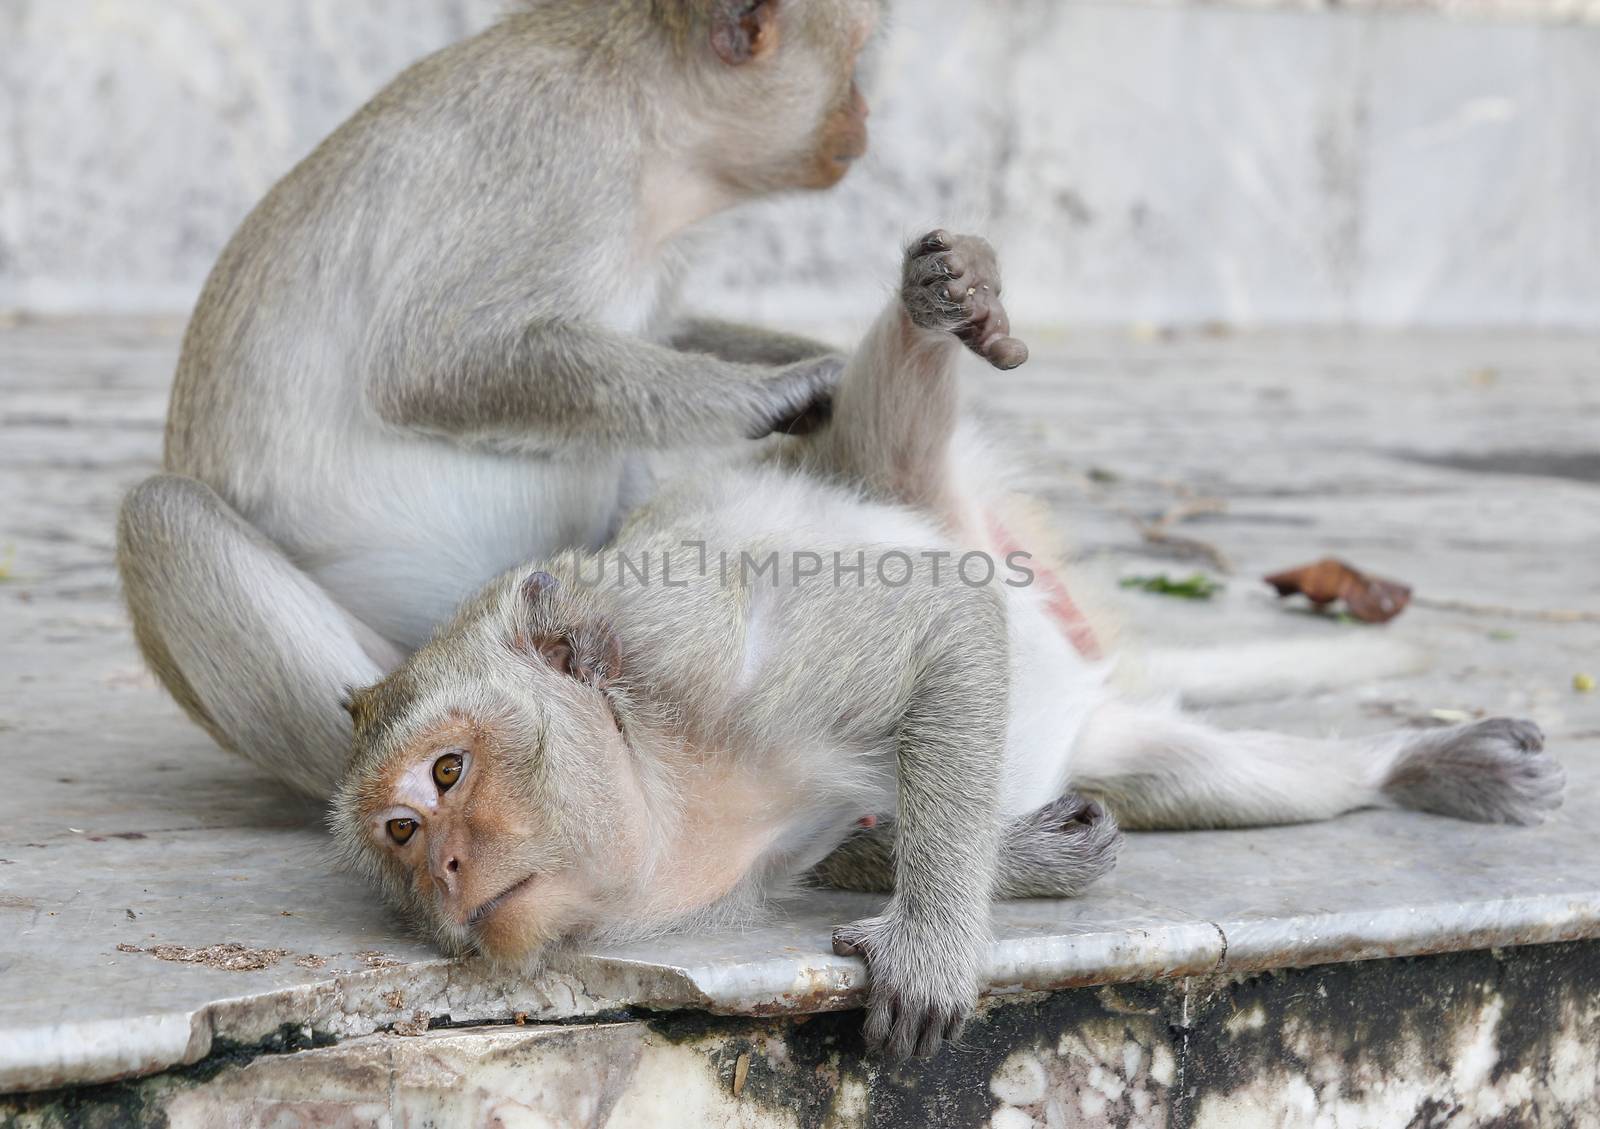 Monkey looking for fleas and ticks by pumppump